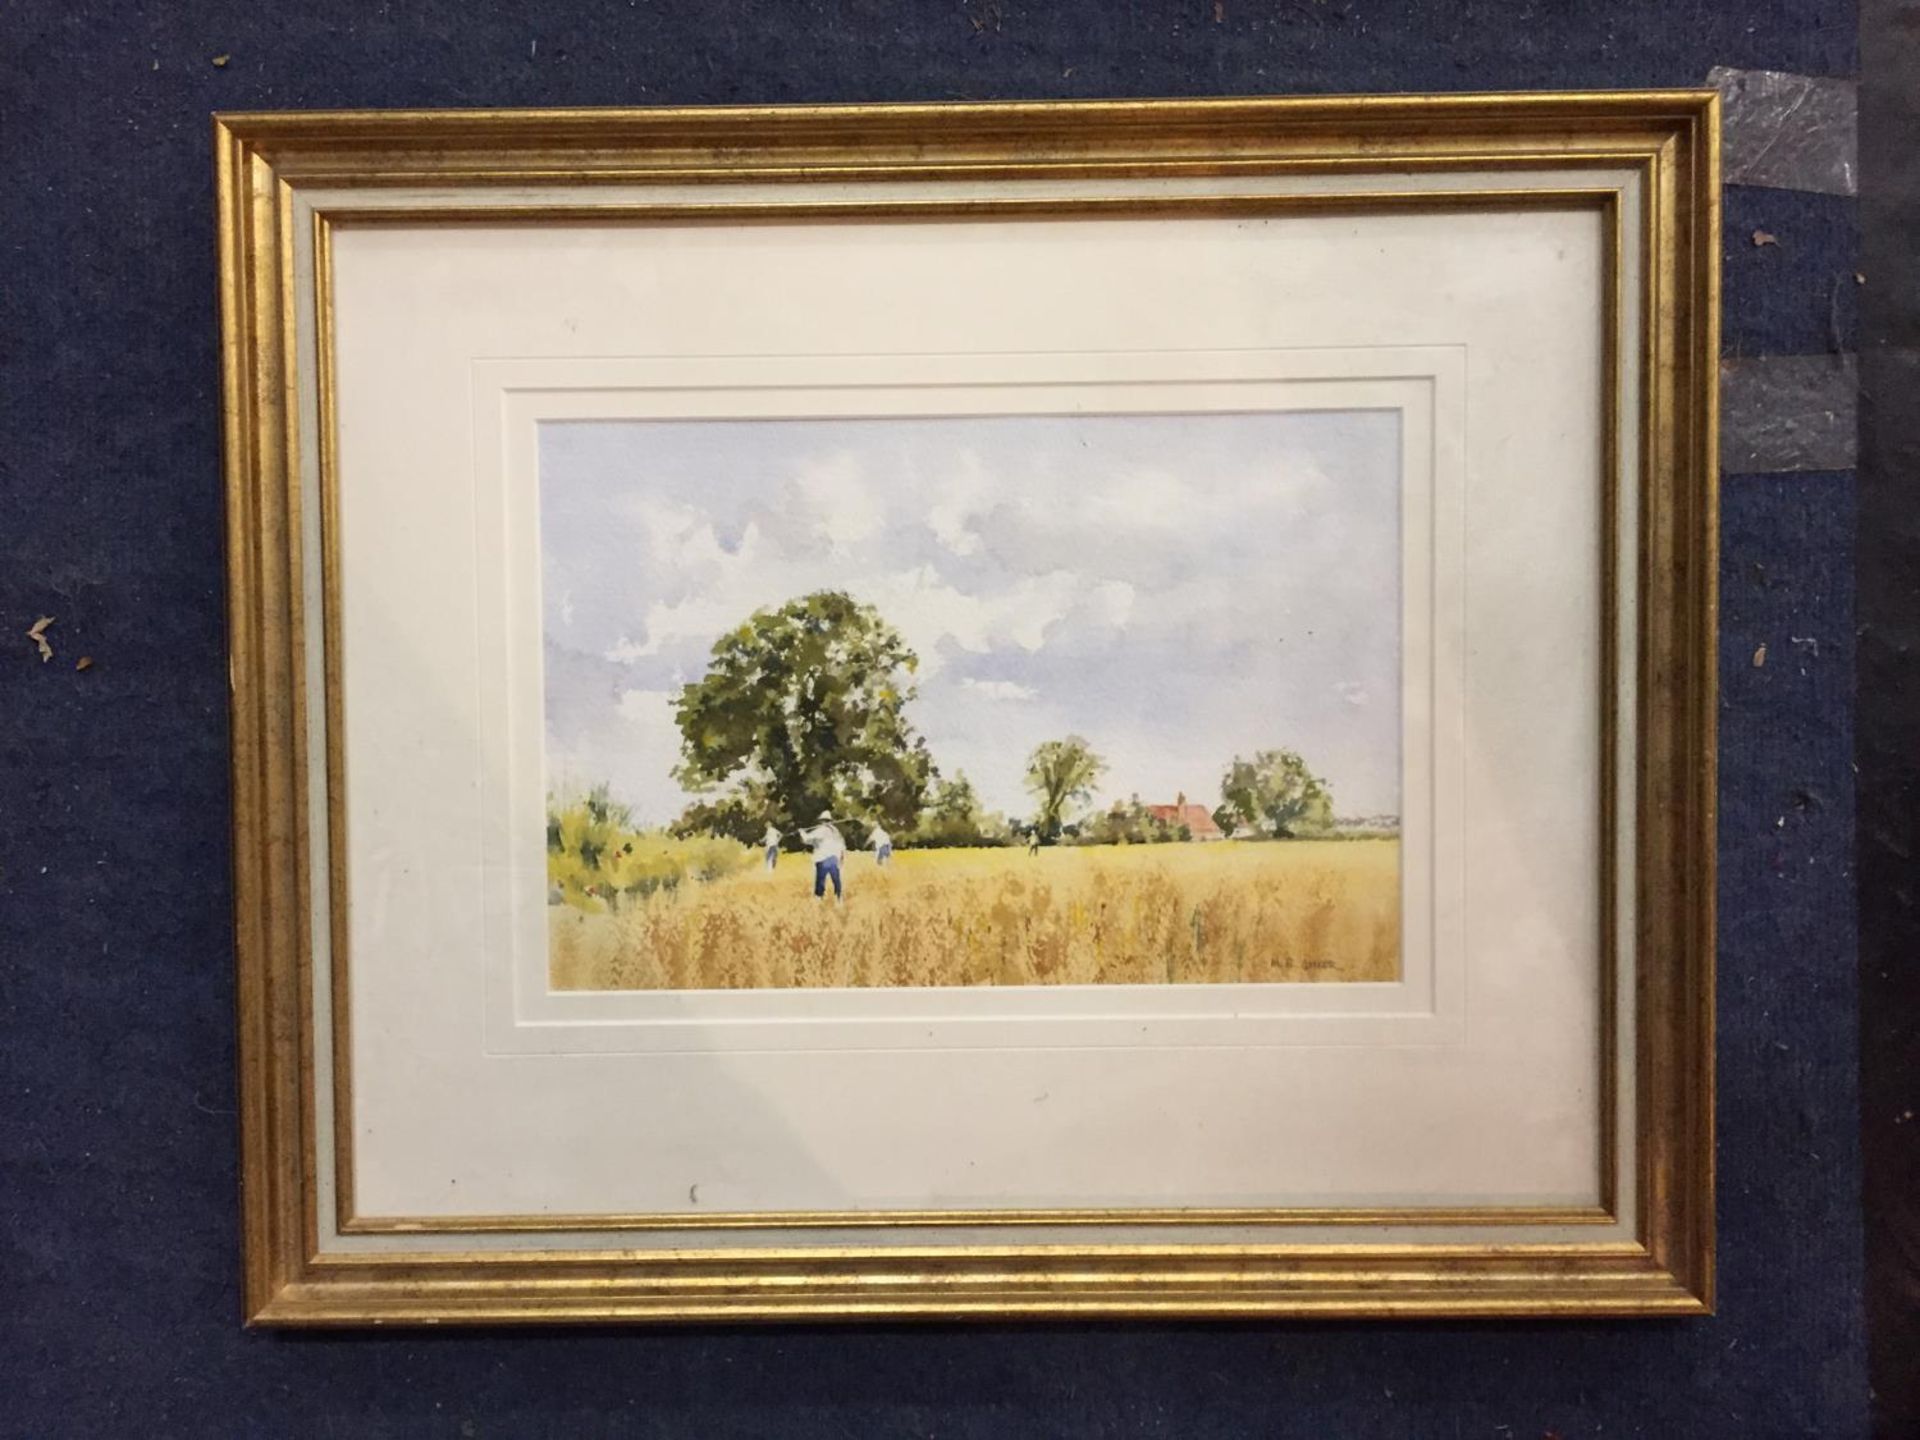 A GILT FRAMED WATER COLOUR OF A COUNTRY HARVEST SCENE PENCIL SIGNED M R ANKER TO RH CORNER